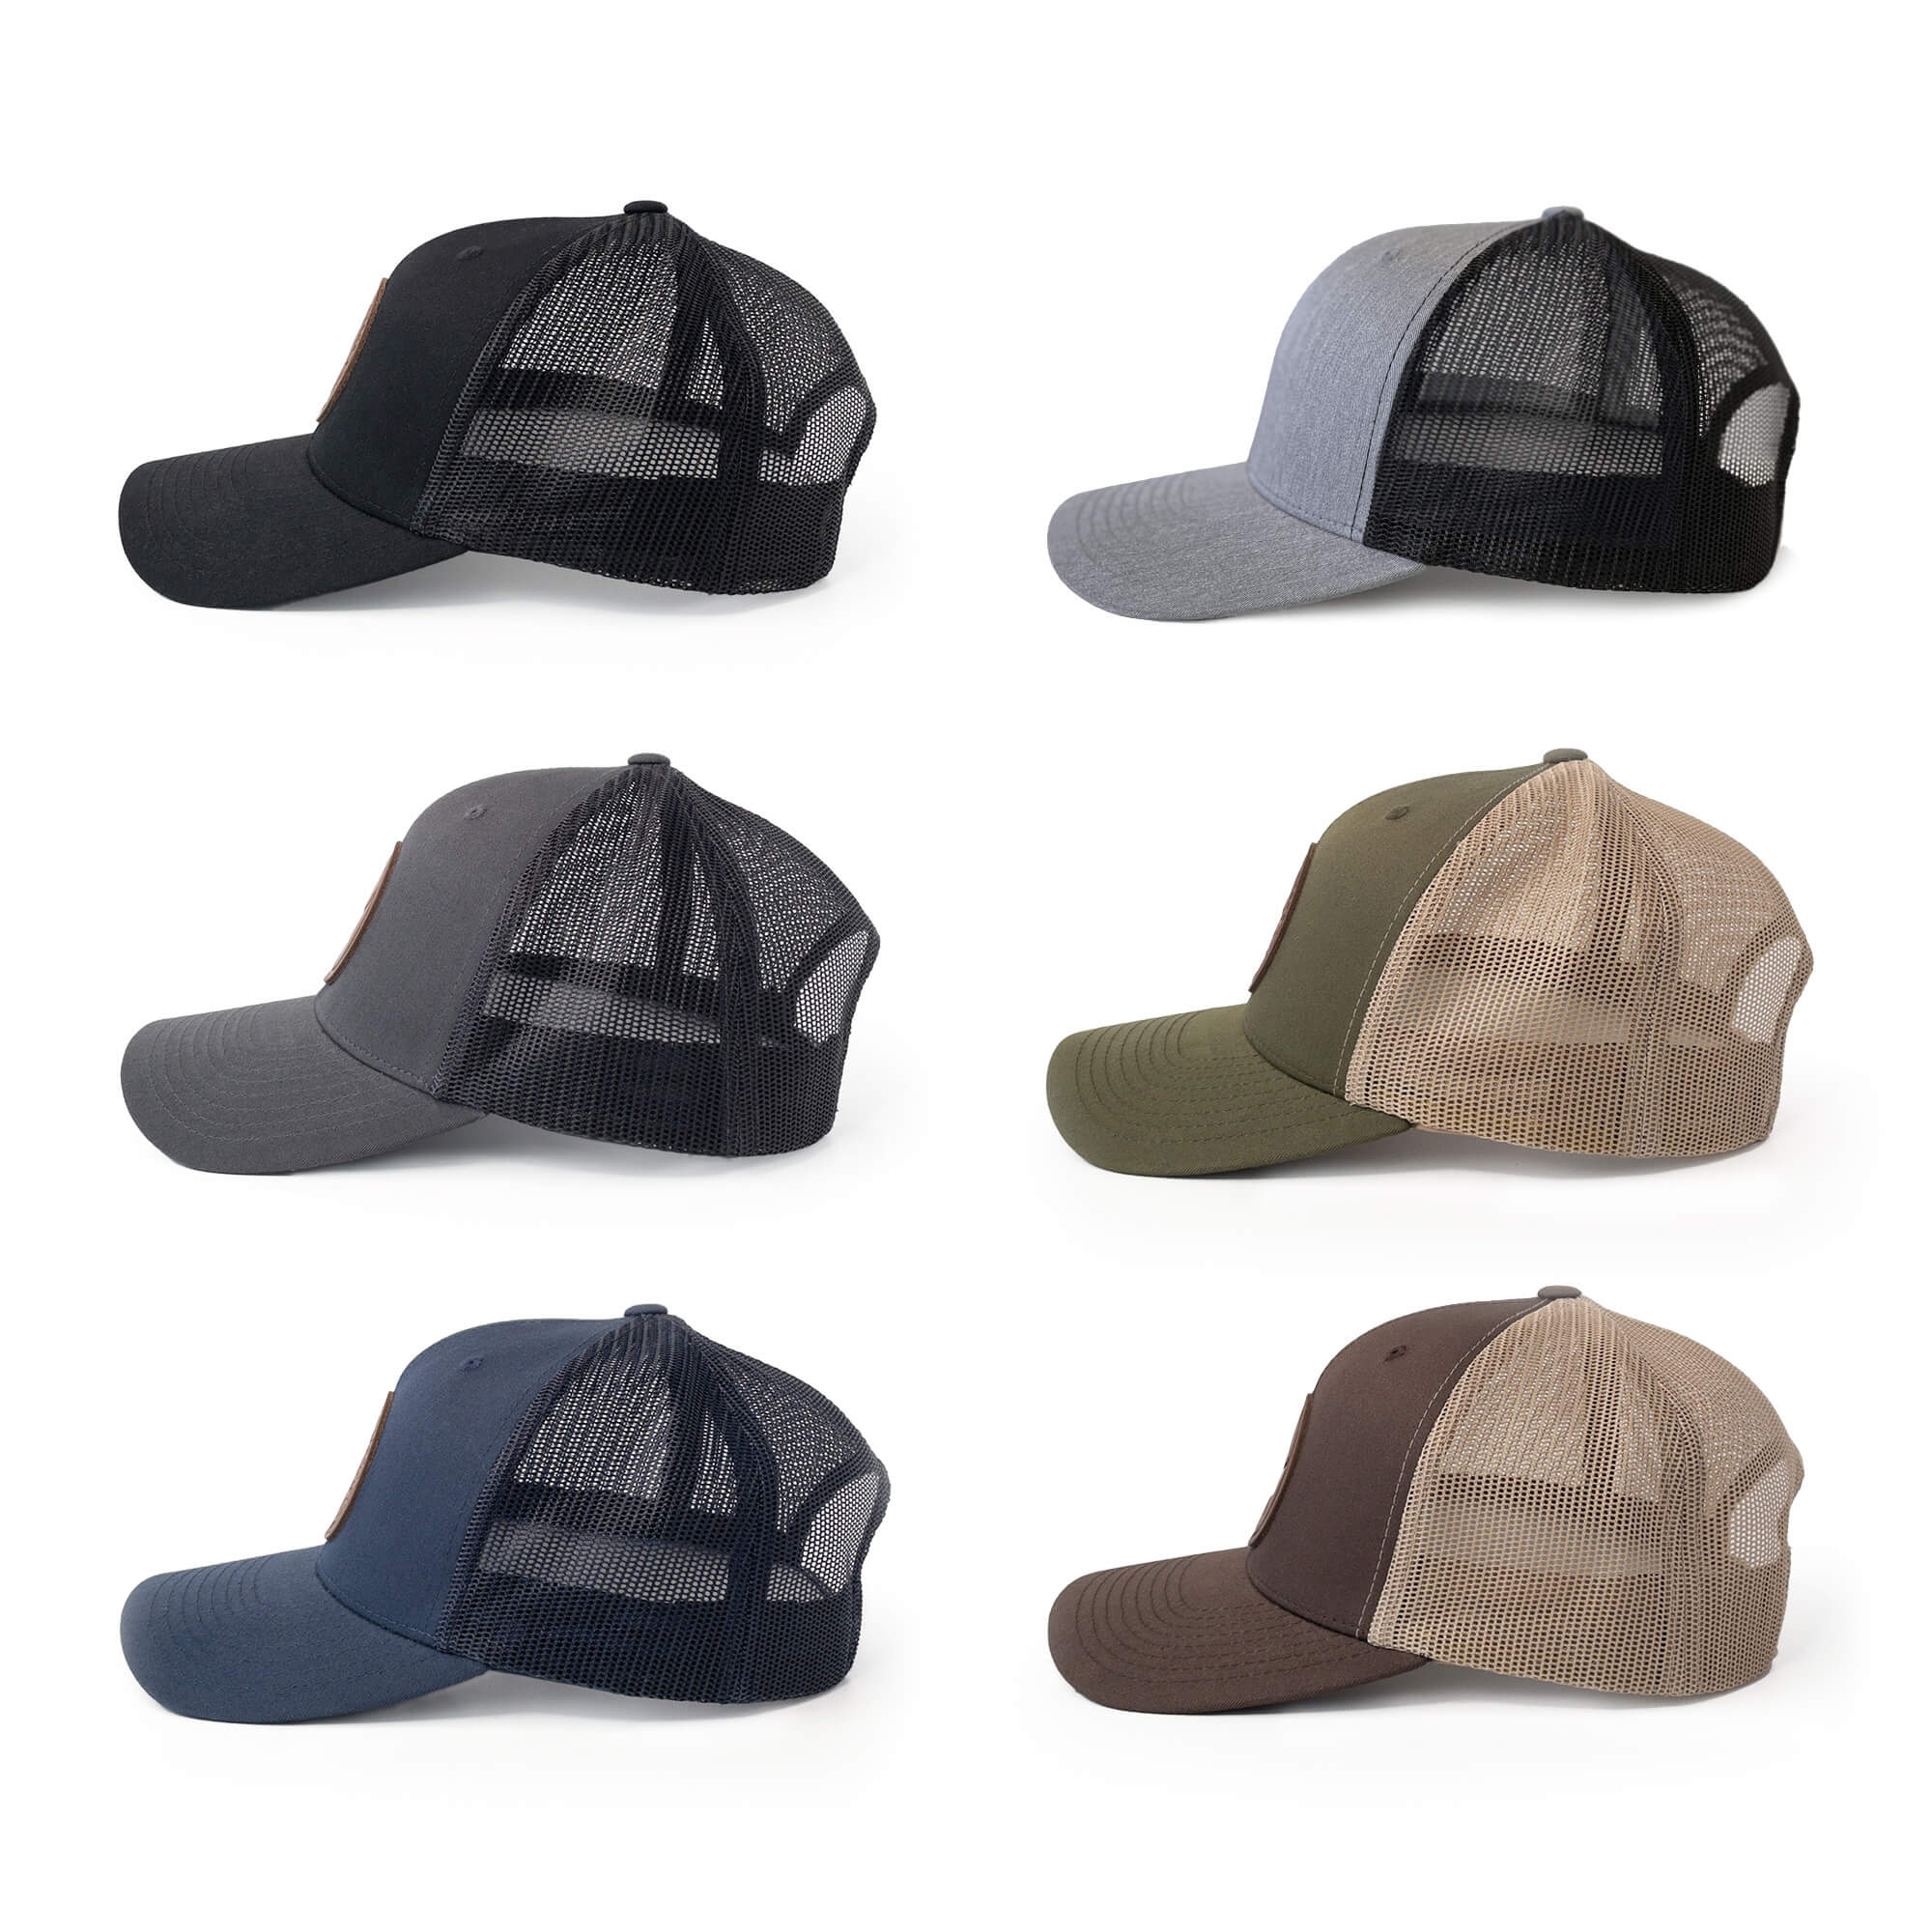 Leather patch trucker hats available in 6 colors | BLACK-004-002, CHARC-004-002, NAVY-004-002, HGREY-004-002, MOSS-004-002, BROWN-004-002